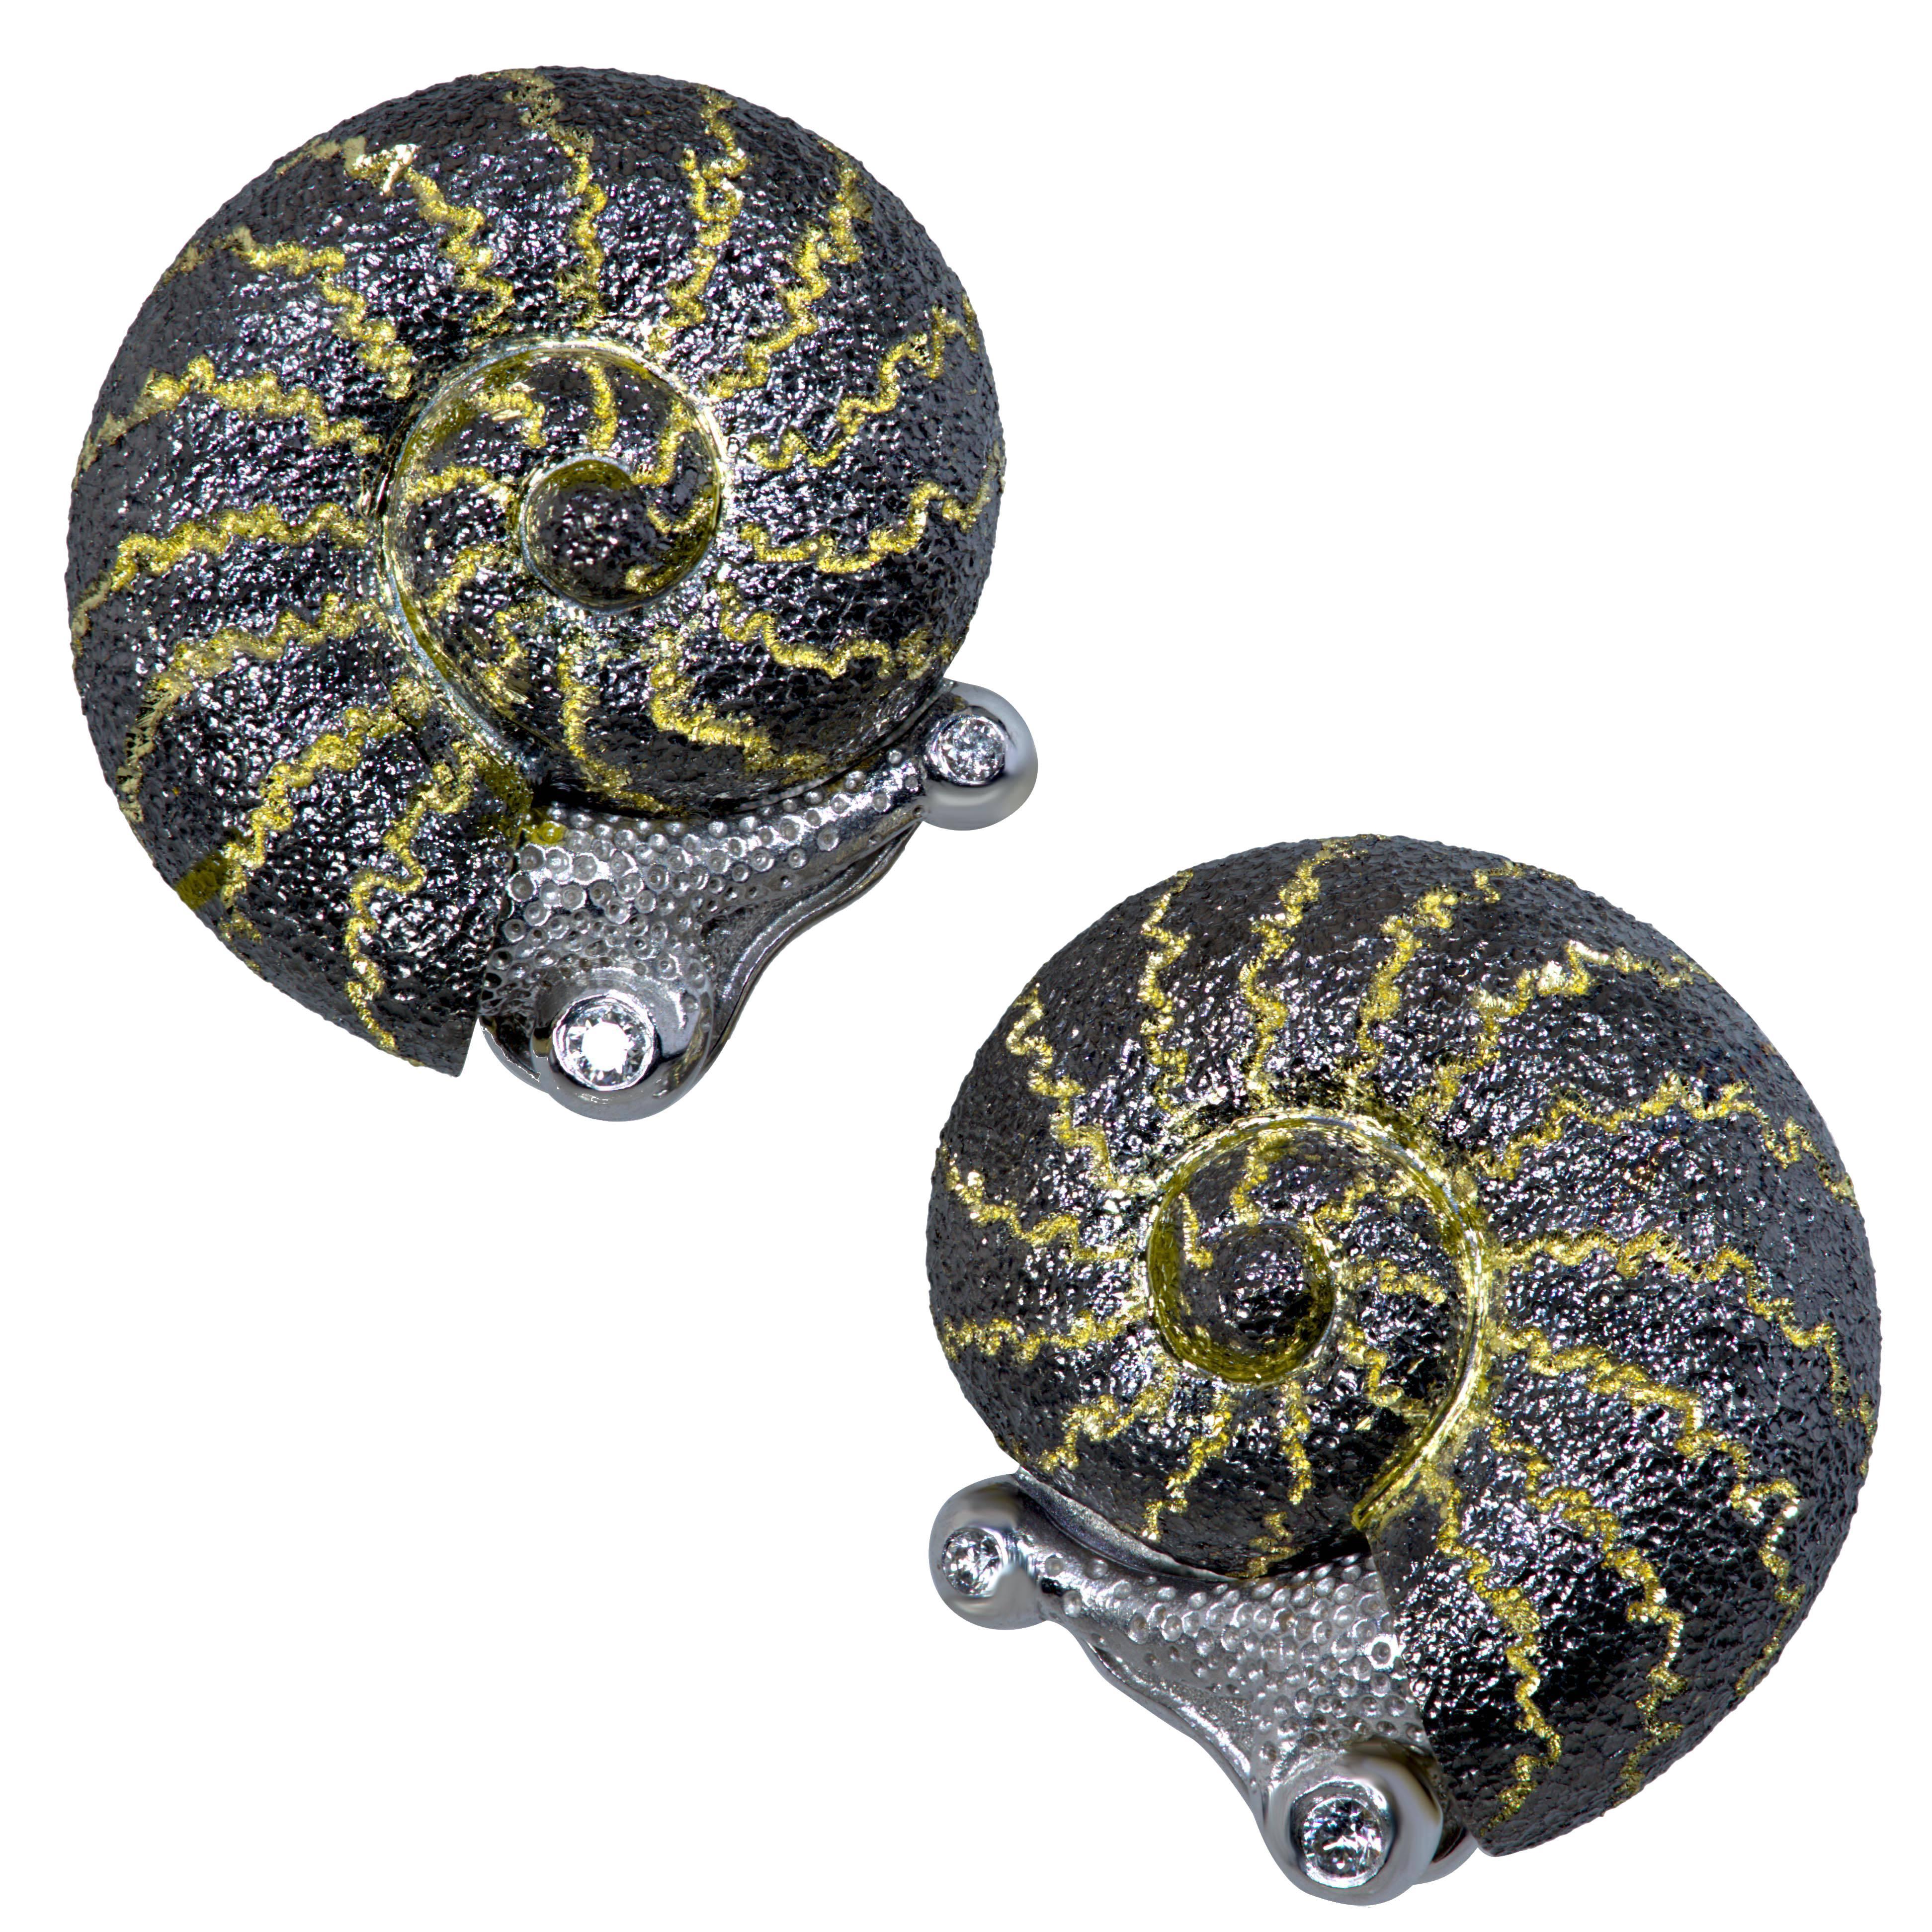 Alex Soldier uses snails as an allegory for slowing down and enjoying life. He has created more than 25 jewel encrusted snails, each unique and one-of-a-kind. It became an instant classic and one of the brand's signature heirlooms with the quality